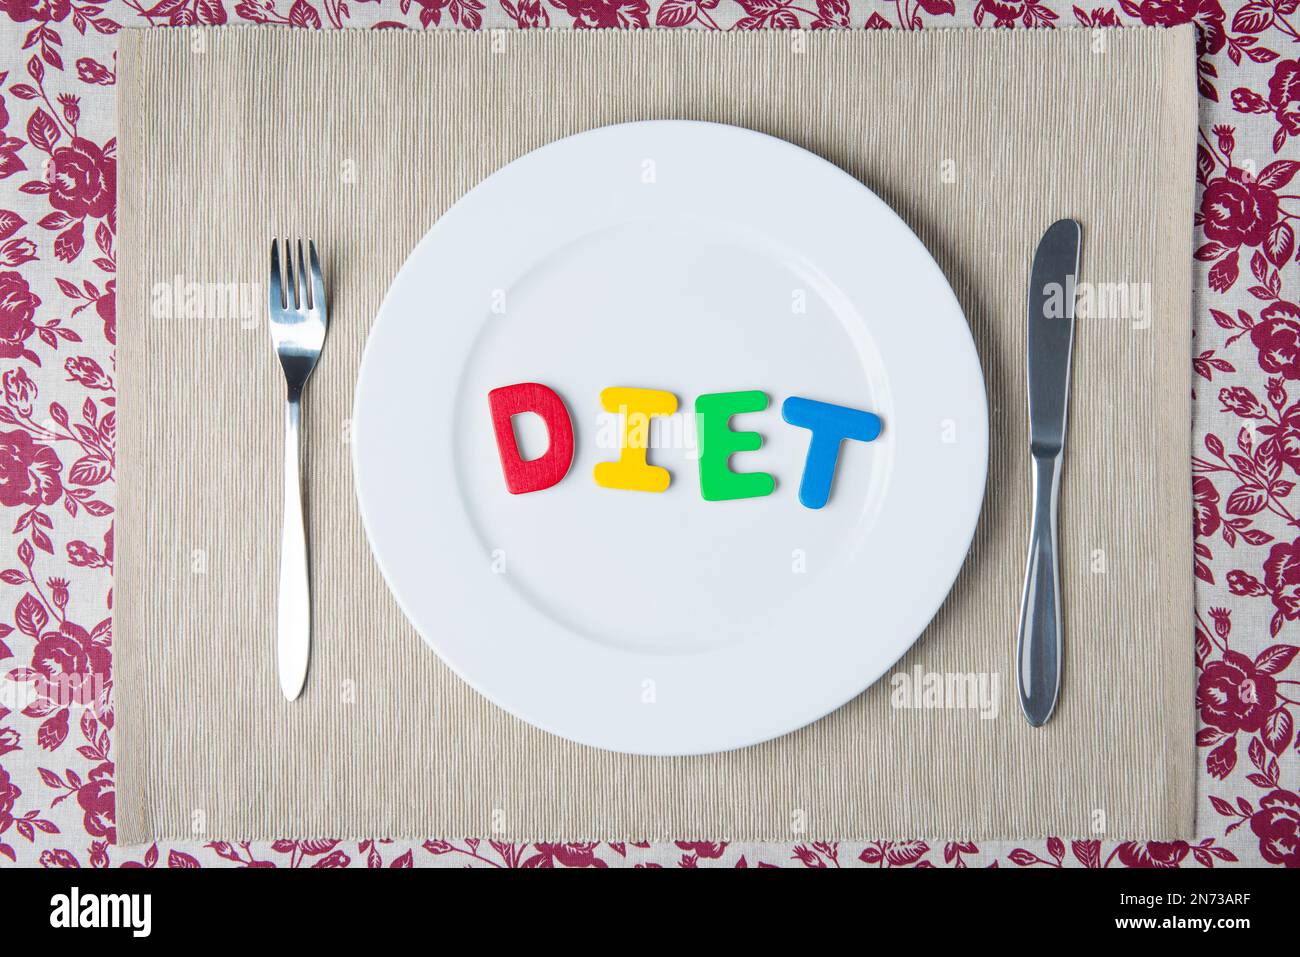 Concept: healthy food and diet - word DIET on a white plate Stock Photo